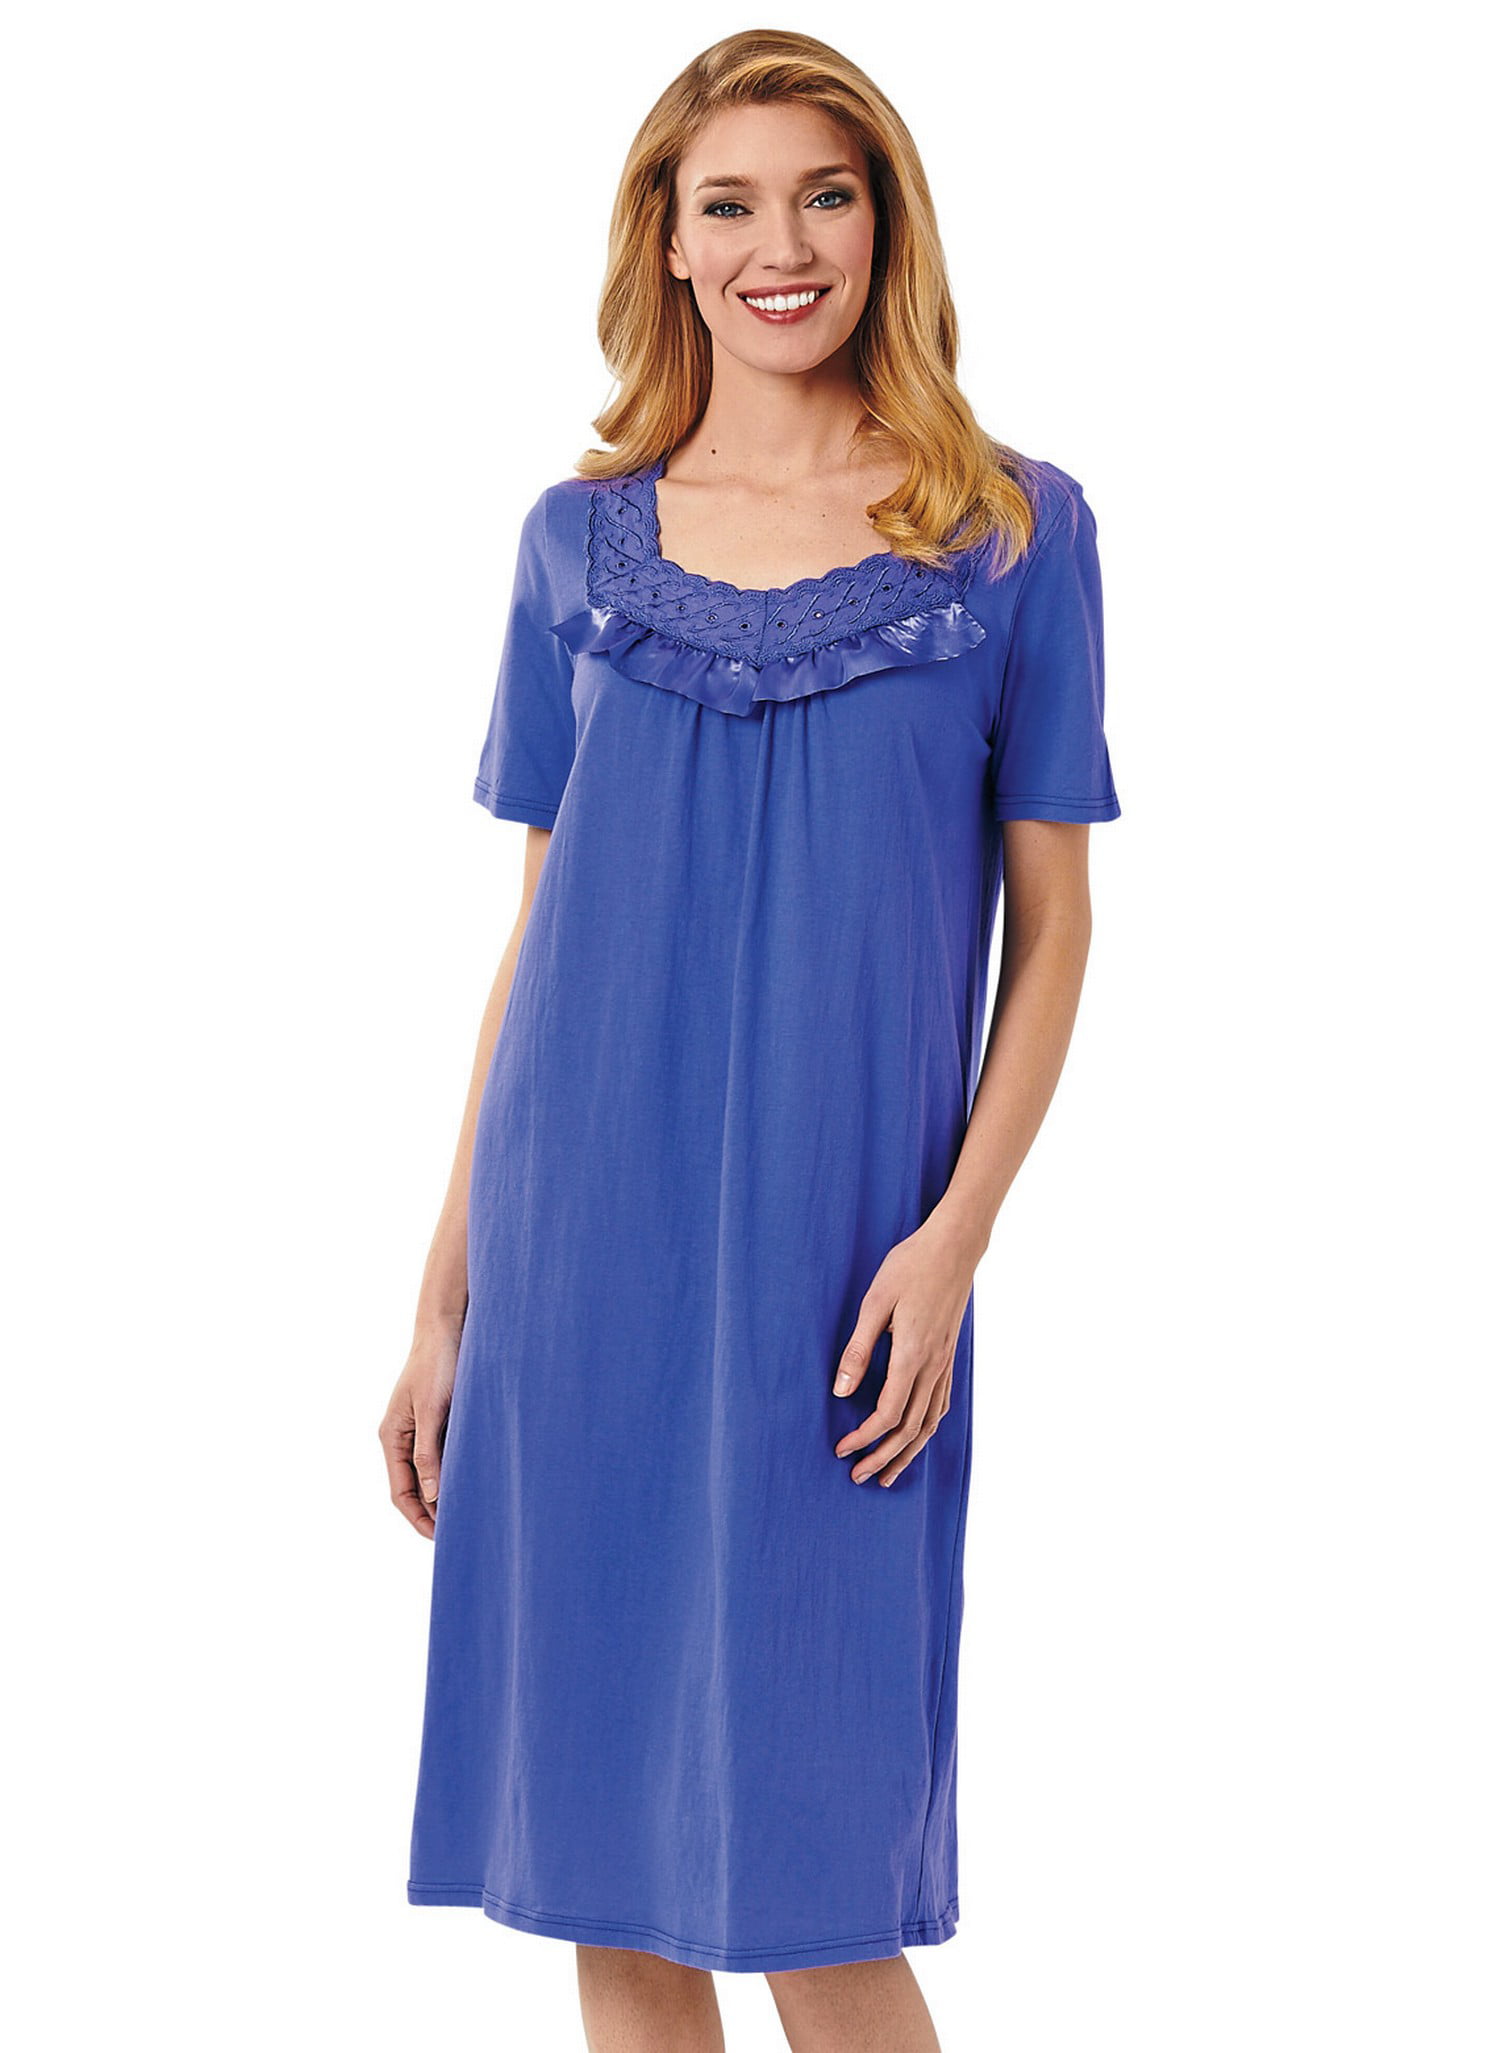 Cotton Knit Nightgown by Cozee Corner French Blue 2X - Walmart.com